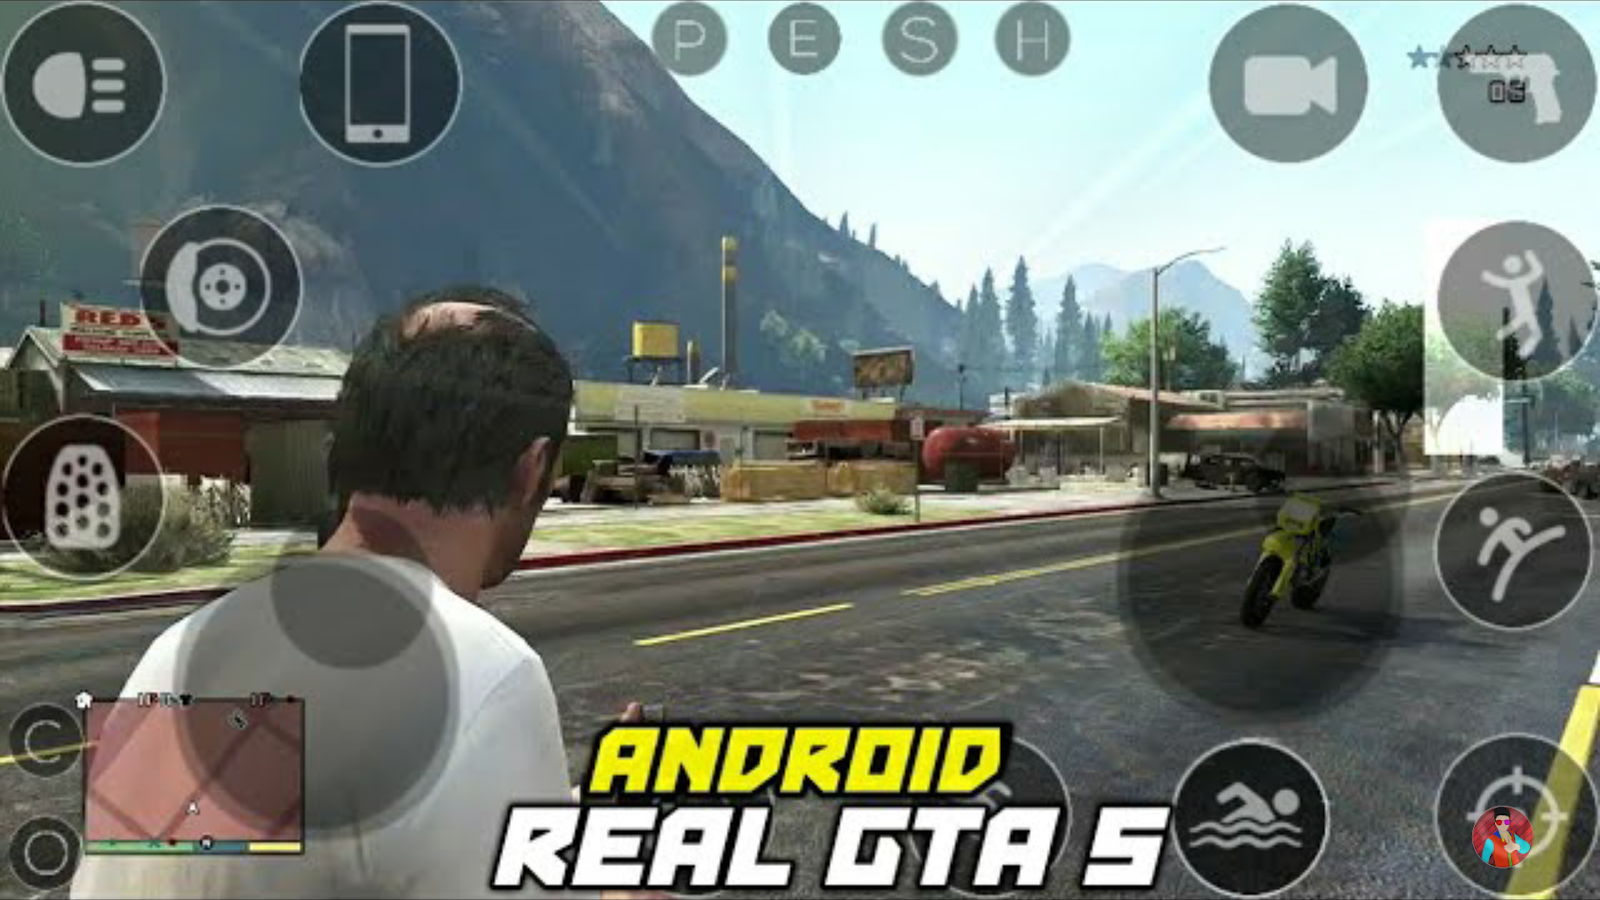 Gta 5 mobile android skachat фото 47